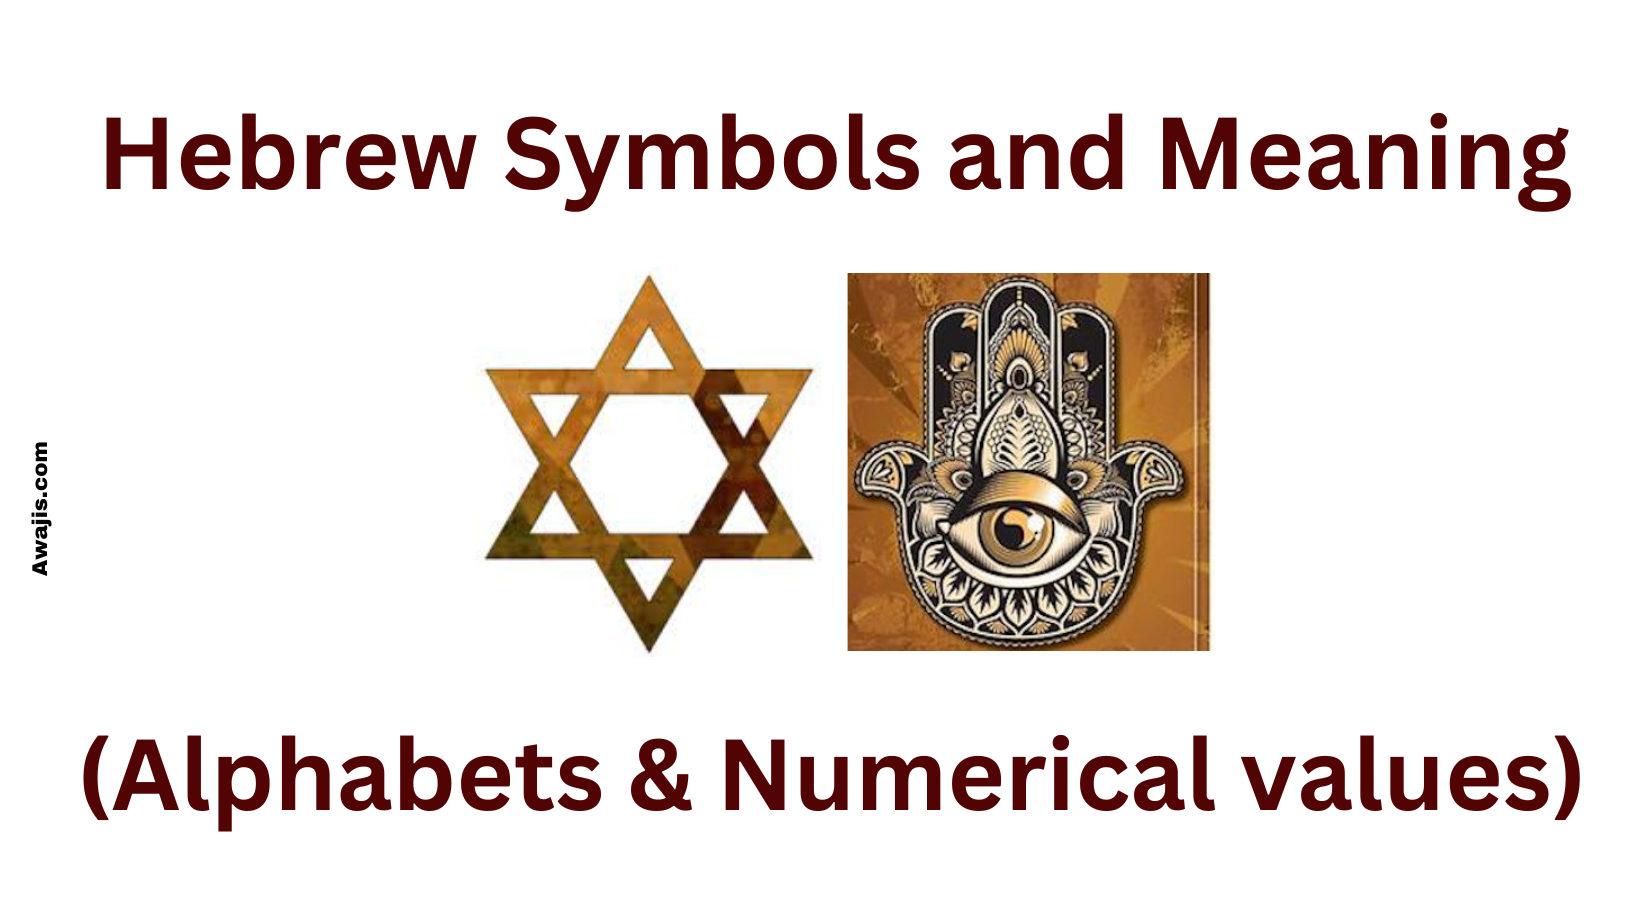 Hebrew Symbols and Meaning(Alphabet & Numerical Values)